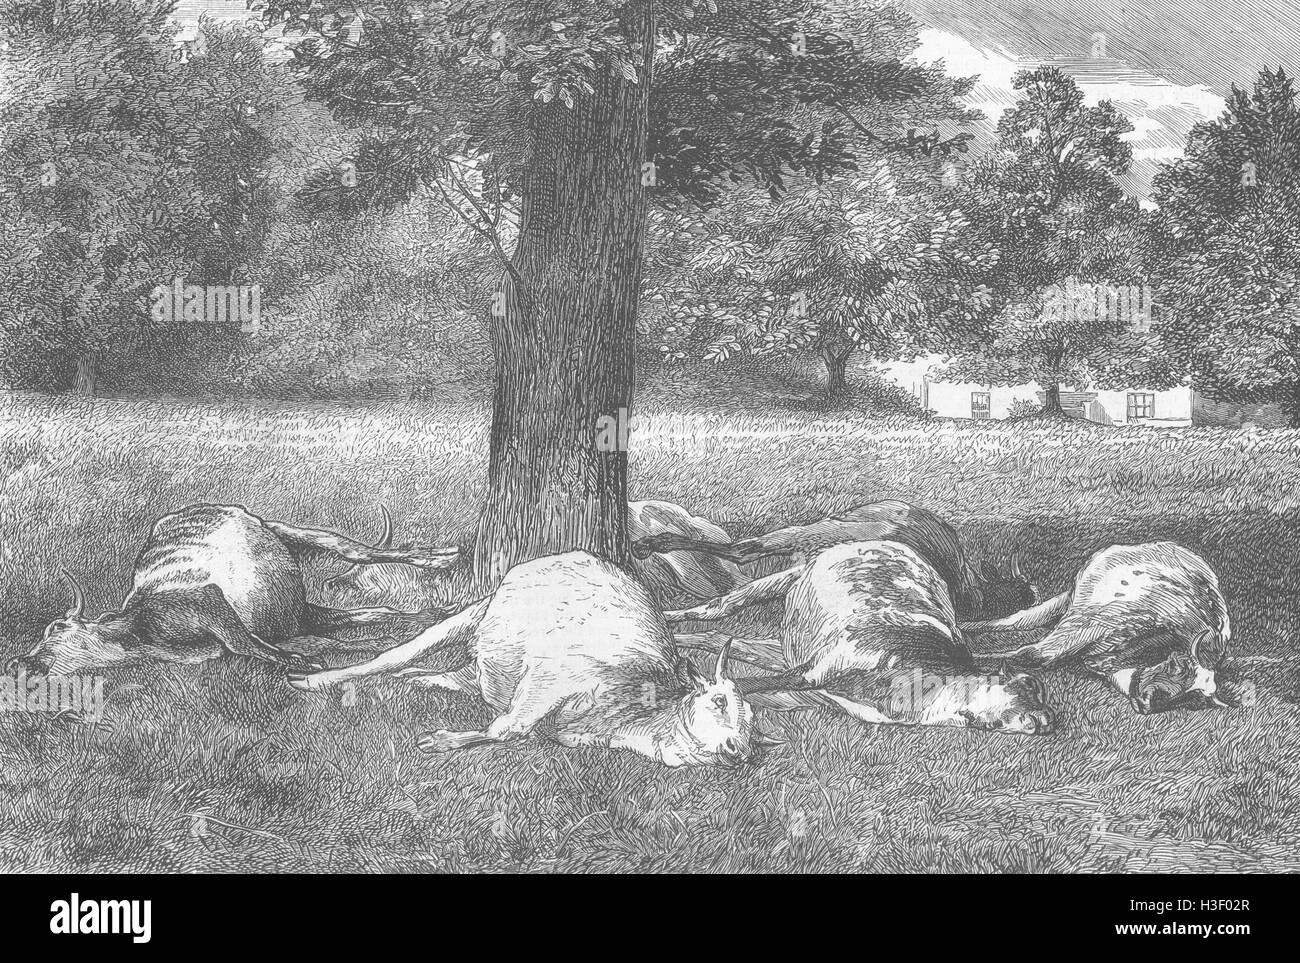 SUFFOLK Cattle struck by lightning, Bury St Edmunds 1872. The Graphic Stock Photo